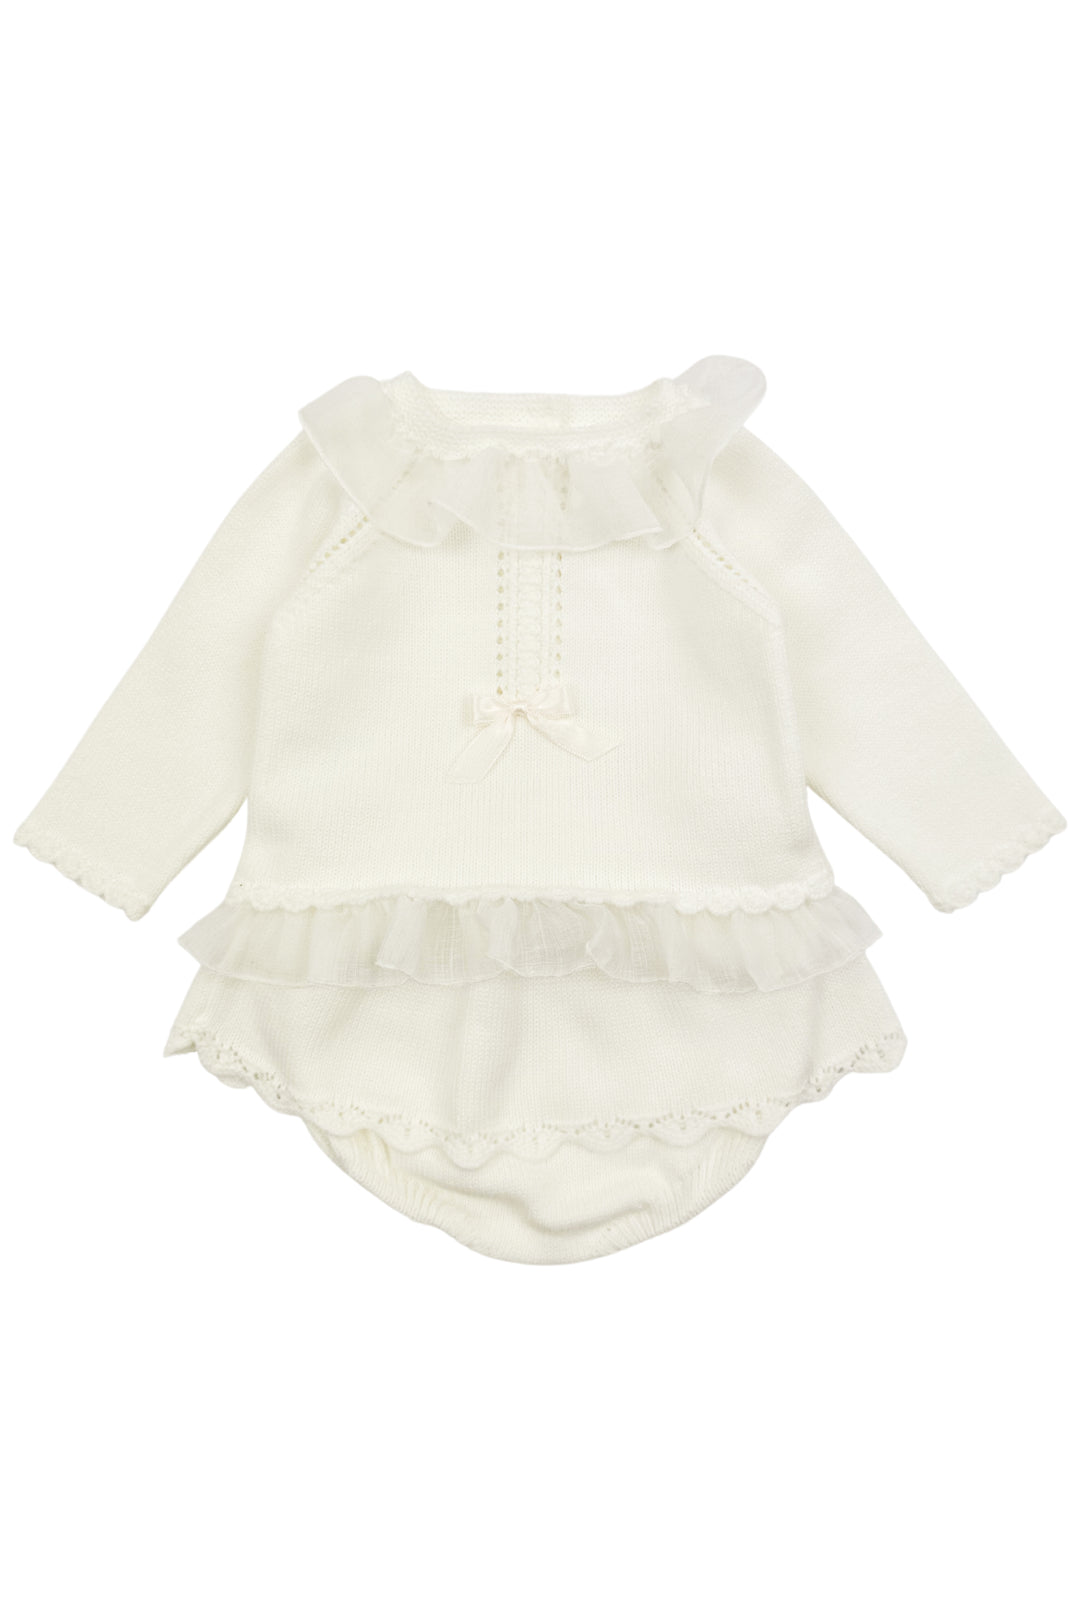 Granlei "Cora" Ivory Knit Top & Bloomers | Millie and John